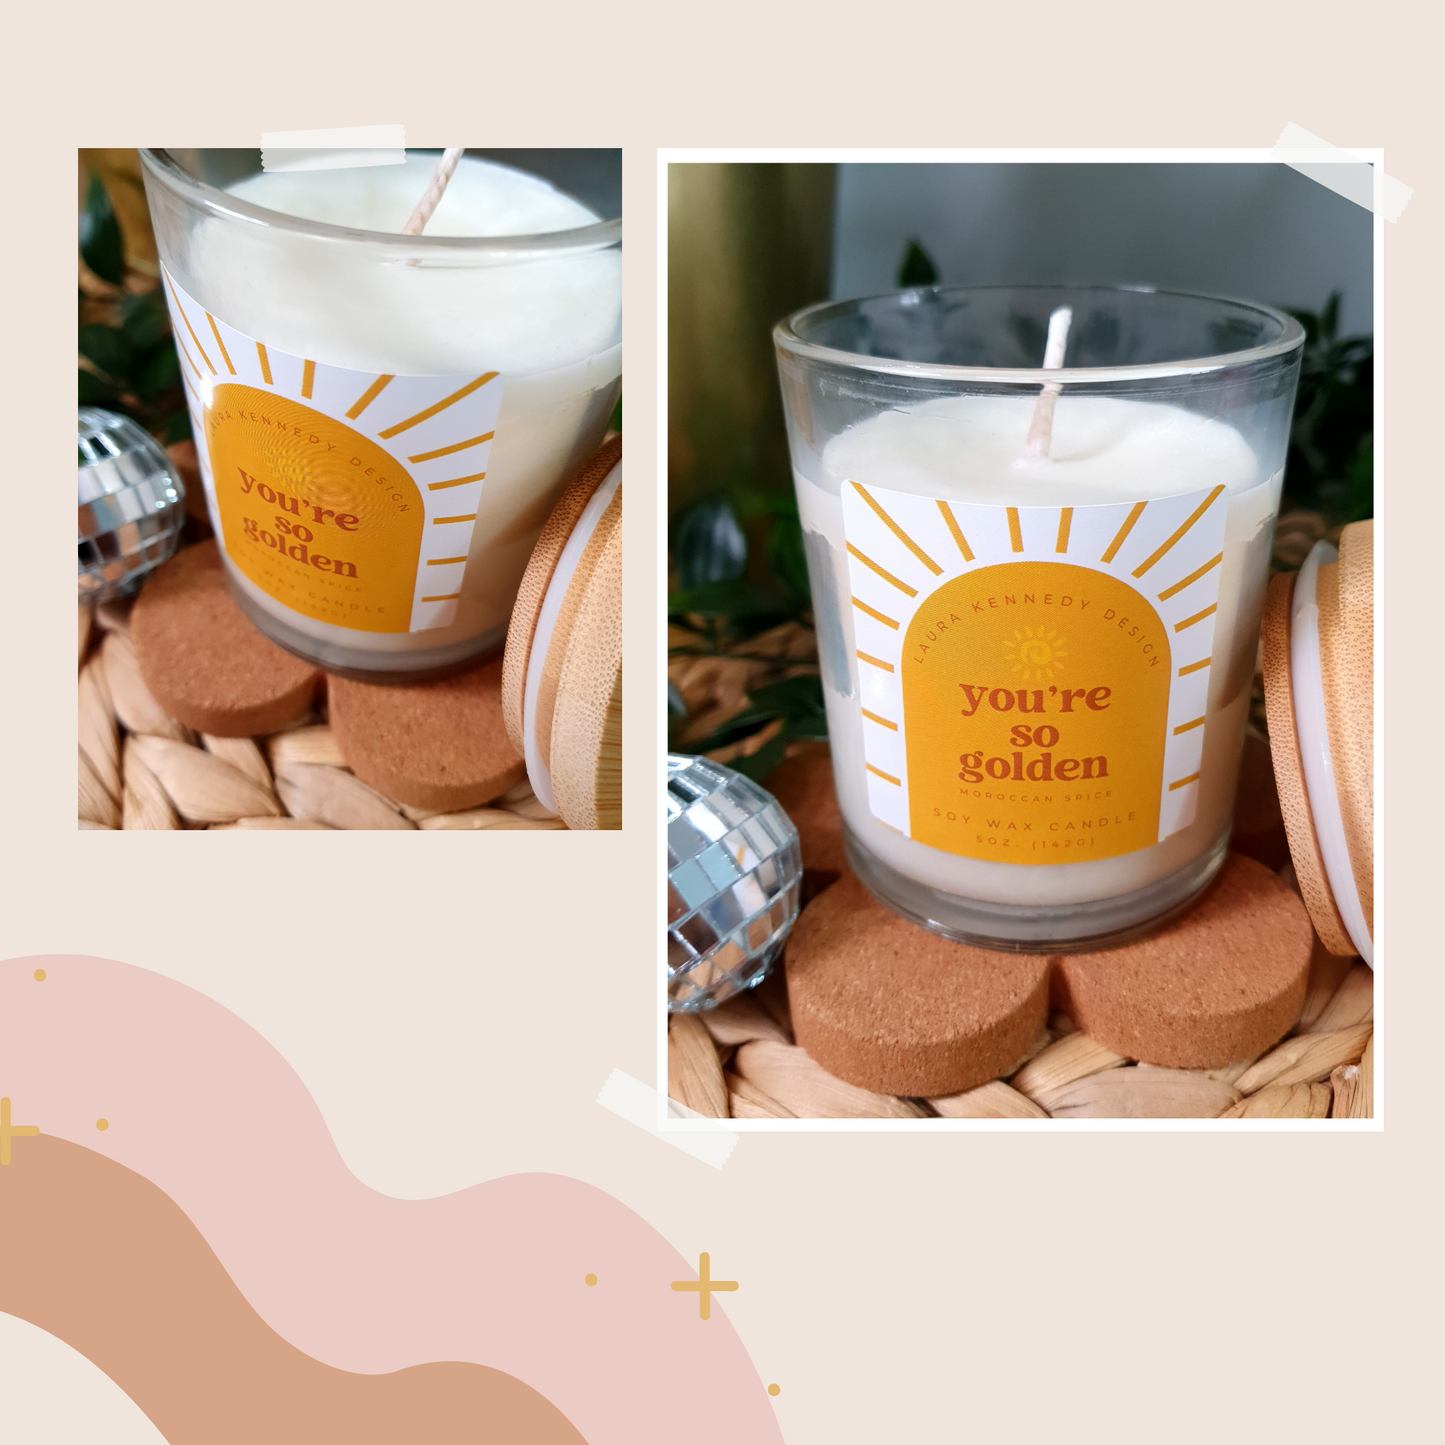 ✨🕯️ "You're So Golden" Moroccan Spice Scented 5oz Soy Wax Candle